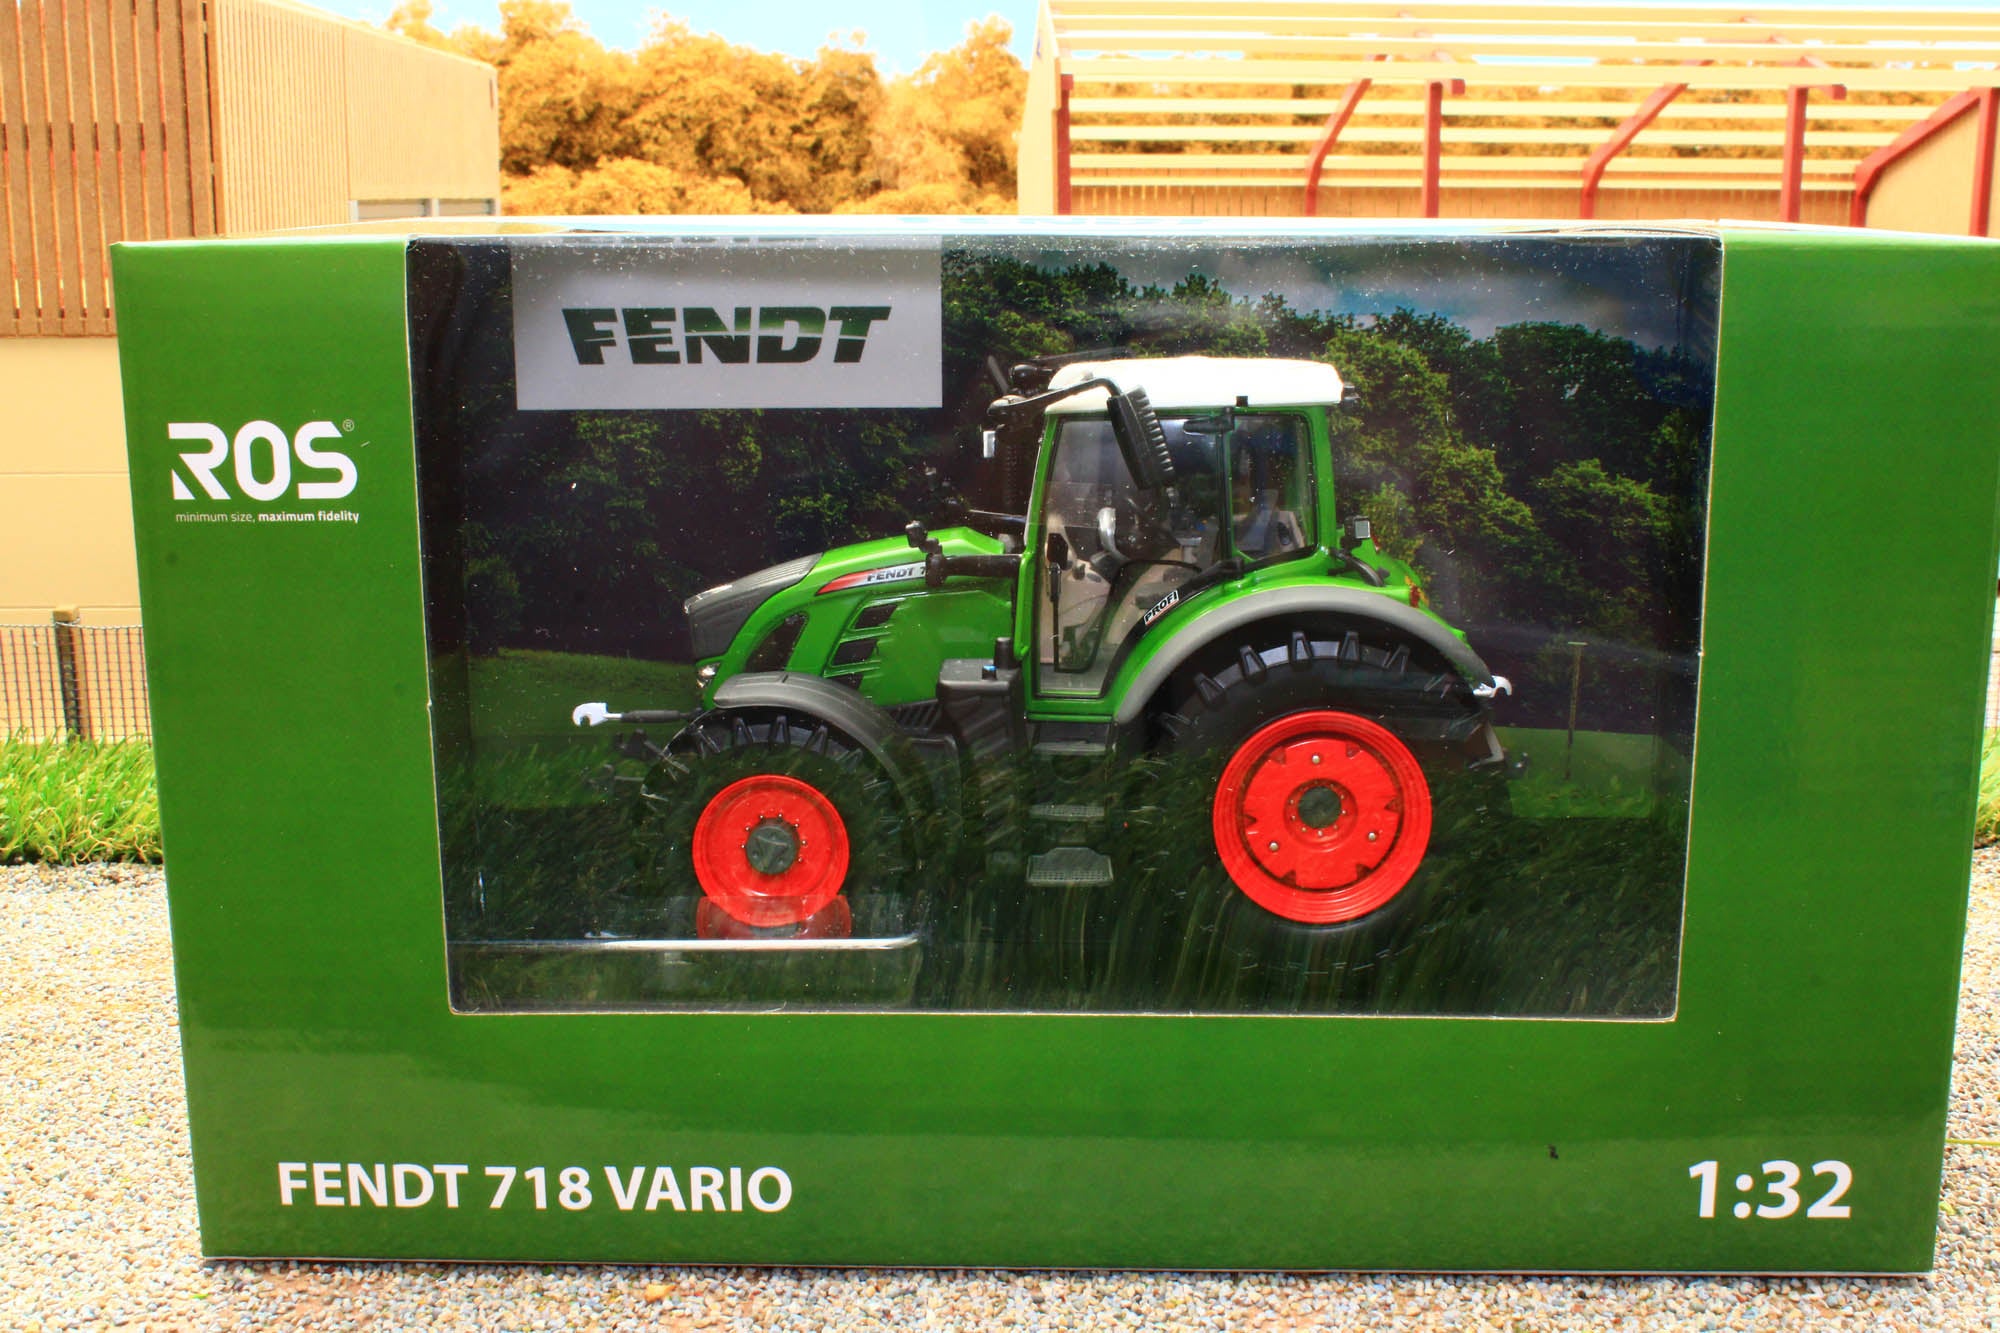 R30185.6 ROS Fendt 718 Vario Tractor – Brushwood Toys